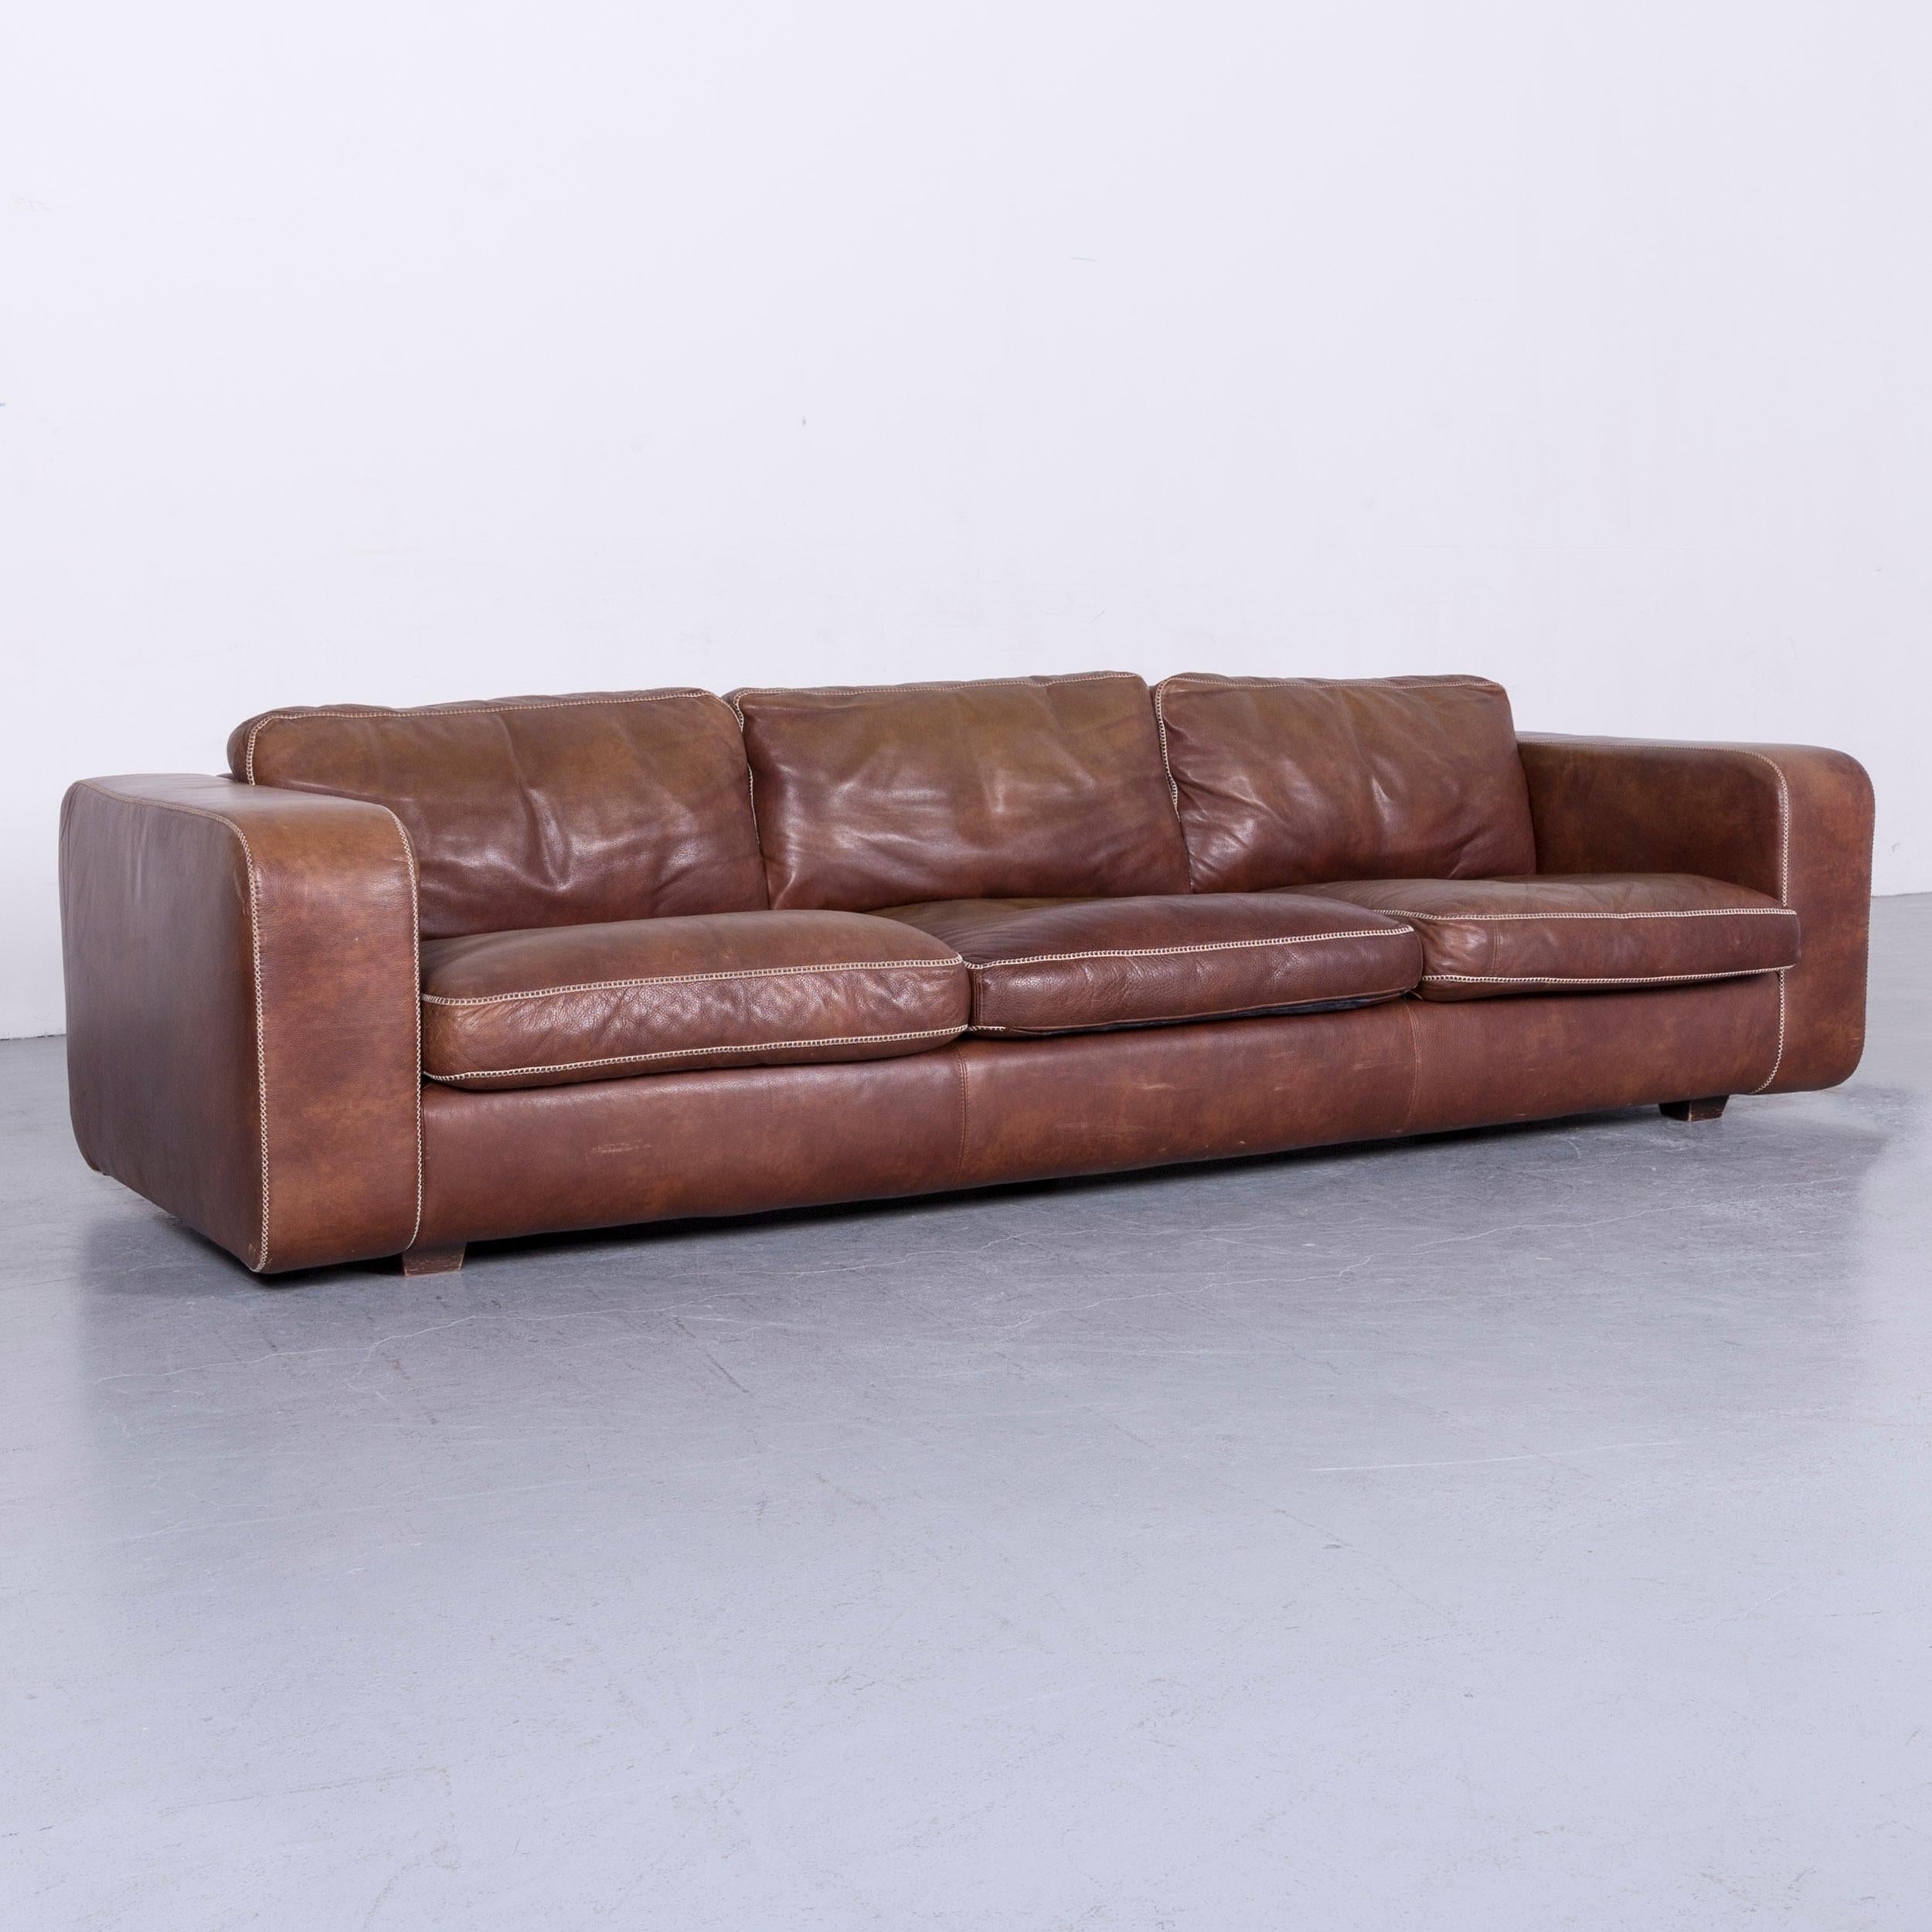 We bring to you an Machalke Valentino designer leather sofa brown three-seat couch.



























